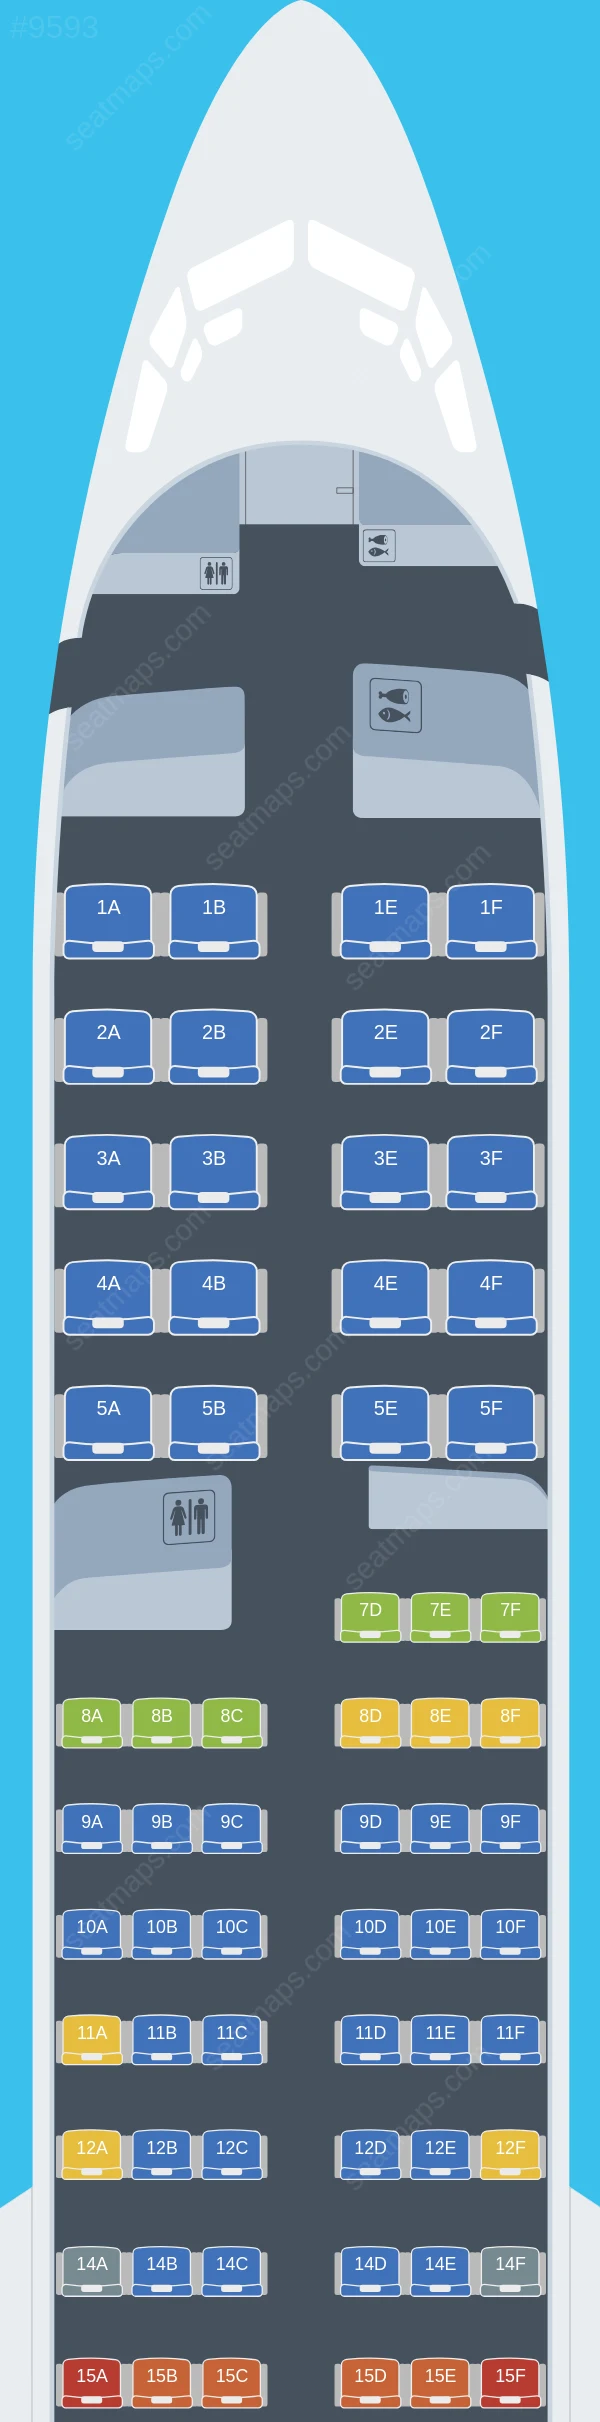 United Boeing 737-900 V.1 seatmap preview